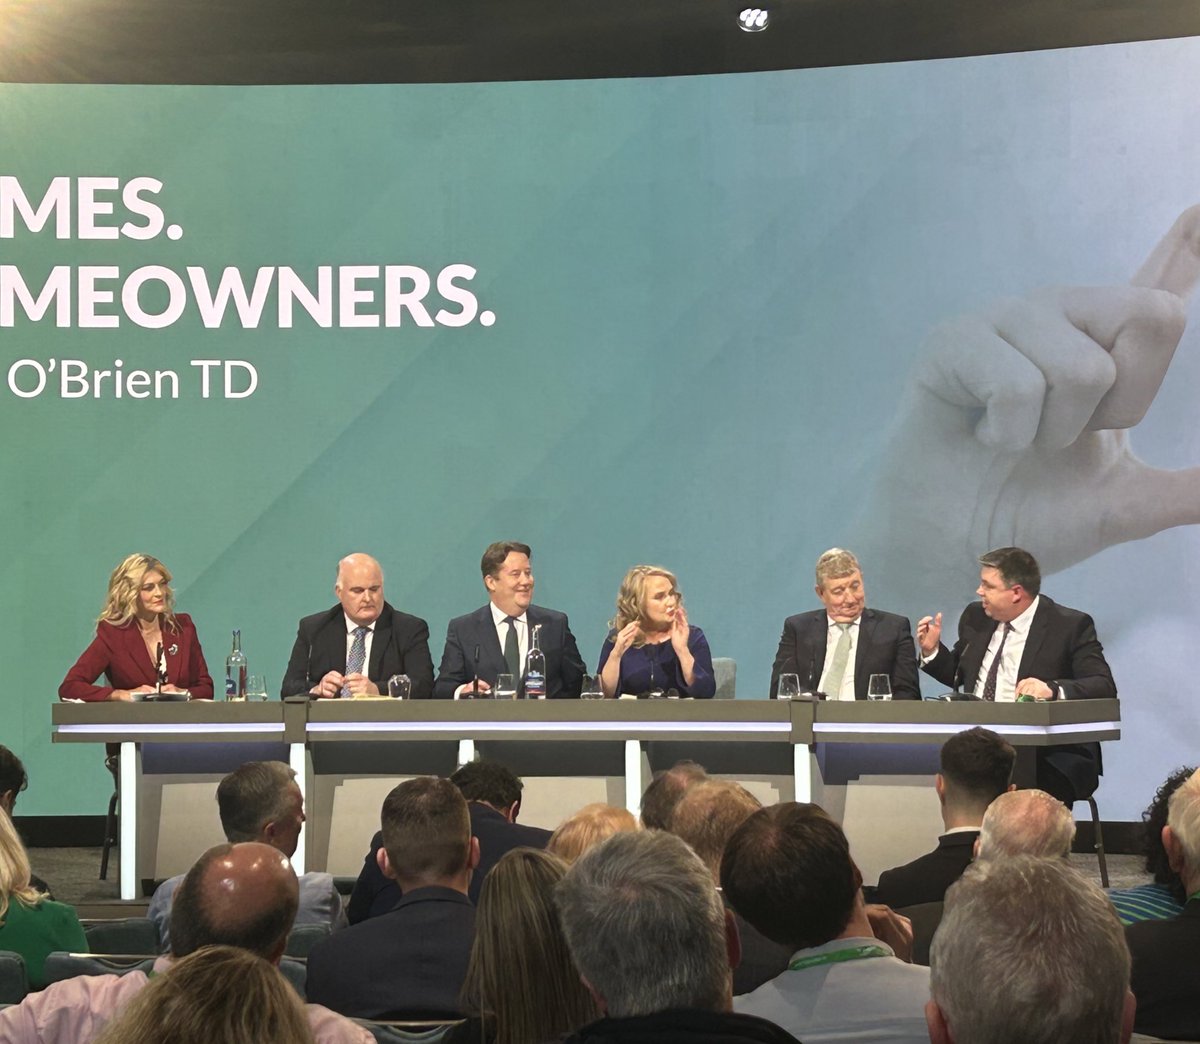 Our housing session ‘More Homes. More Homeowners.’ is getting underway here at #FFArdFheis24 with Chair @votemaryfitz & panelist’s @joefla @PaulMcauliffe @SenatorPatCasey & @cynimhurchu Lots of progress under #HousingforAll but much more to do. 🏡